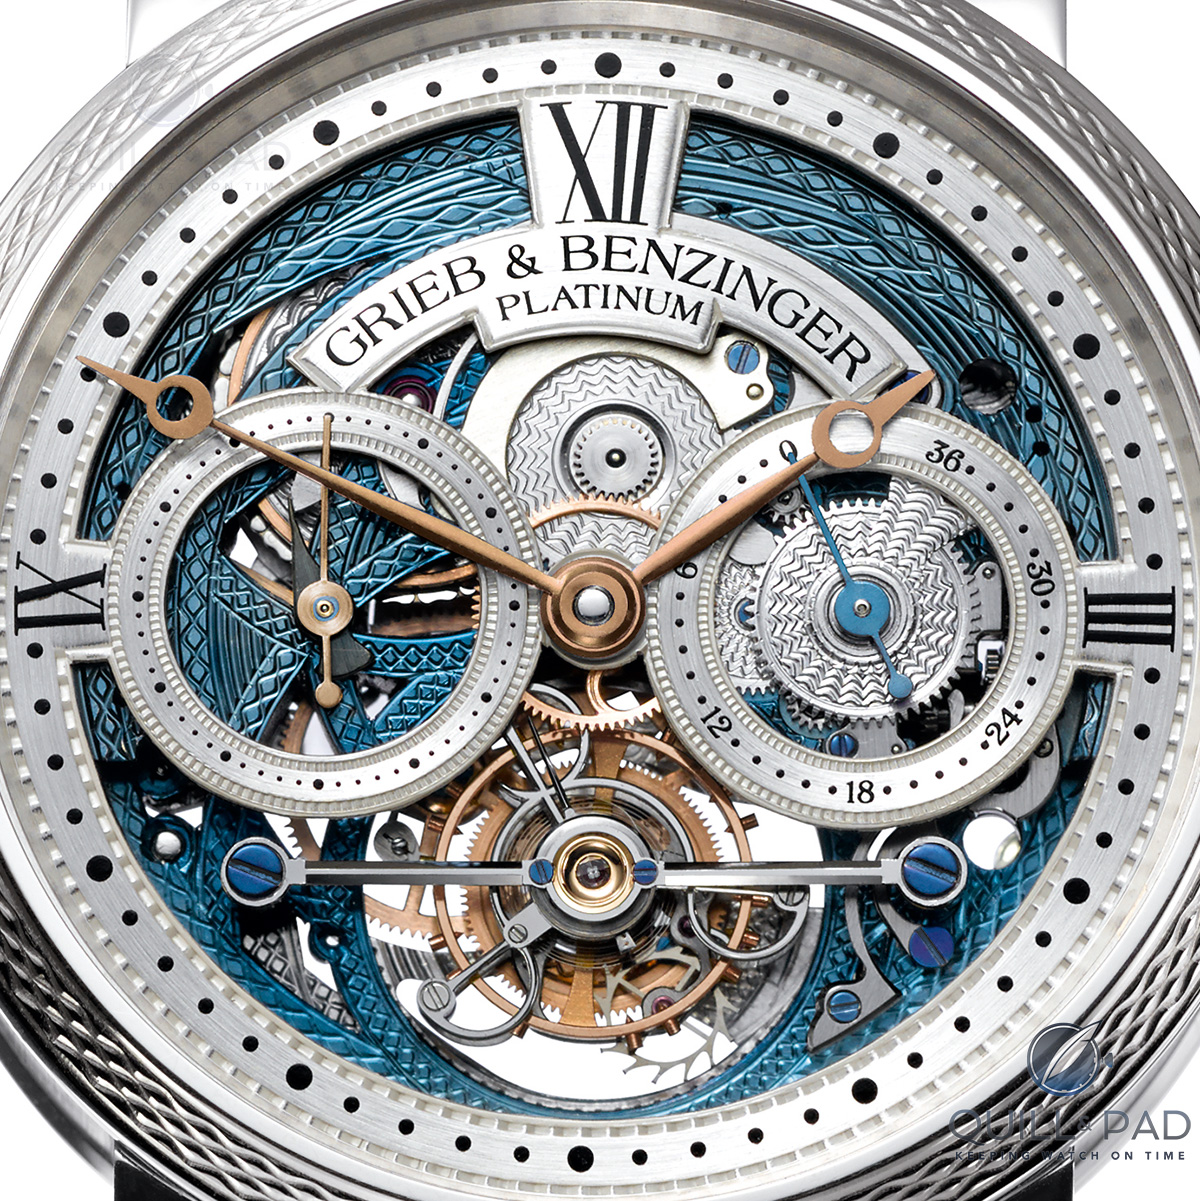 Intricately skeletonized and engraved dial of the Grieb & Benzinger Blue Merit